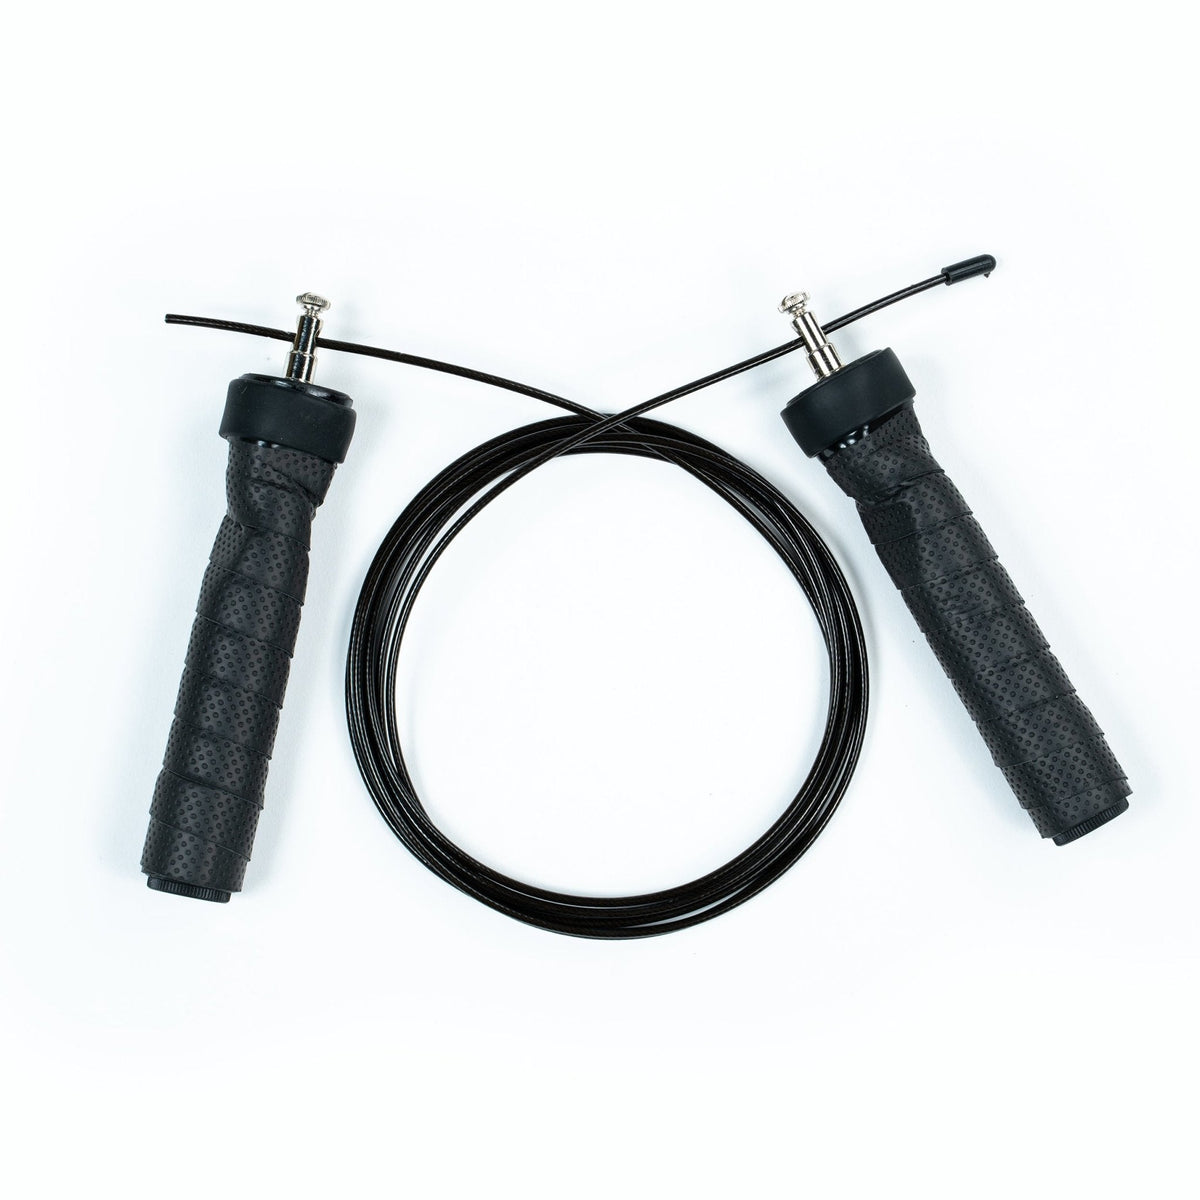 FitWay Equip. FitWay Ergonomic Grip Speed Rope - Fitness Experience